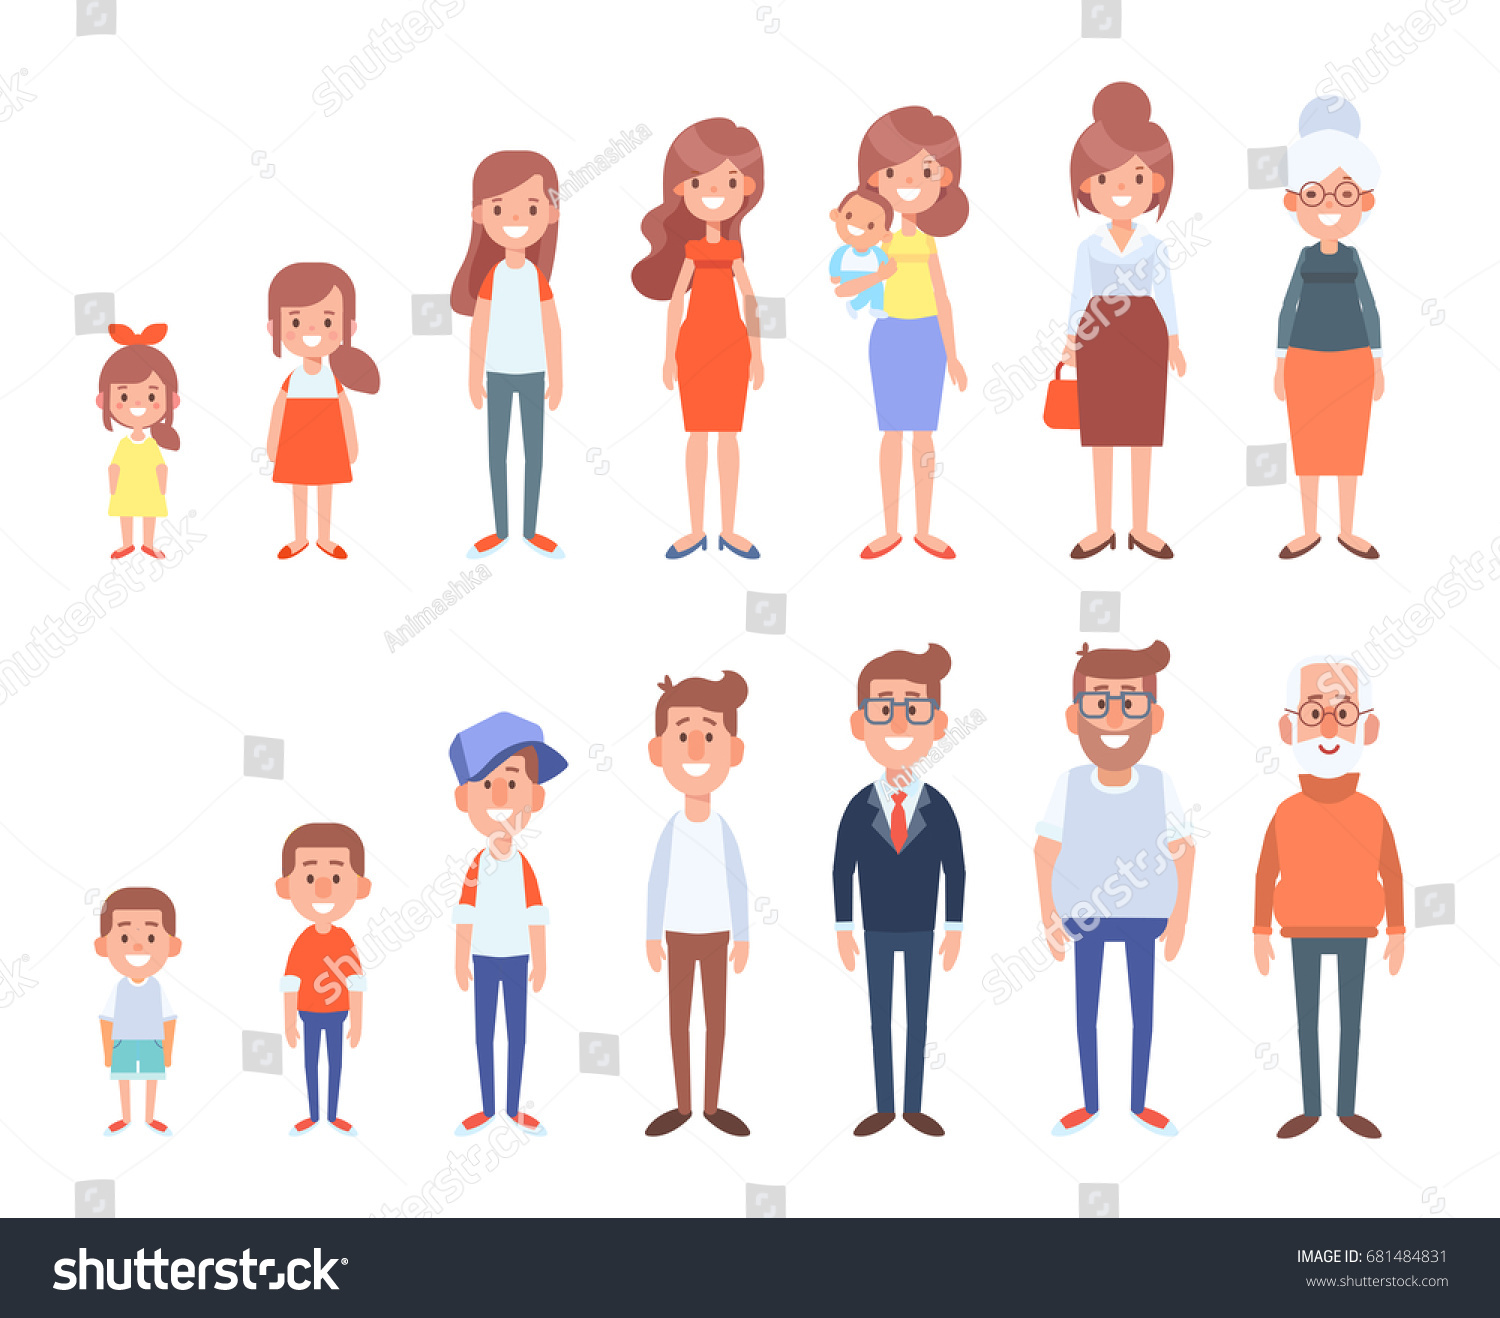 SVG of Set of characters in a flat style. Men and women characters, the cycle of life, growing up. svg